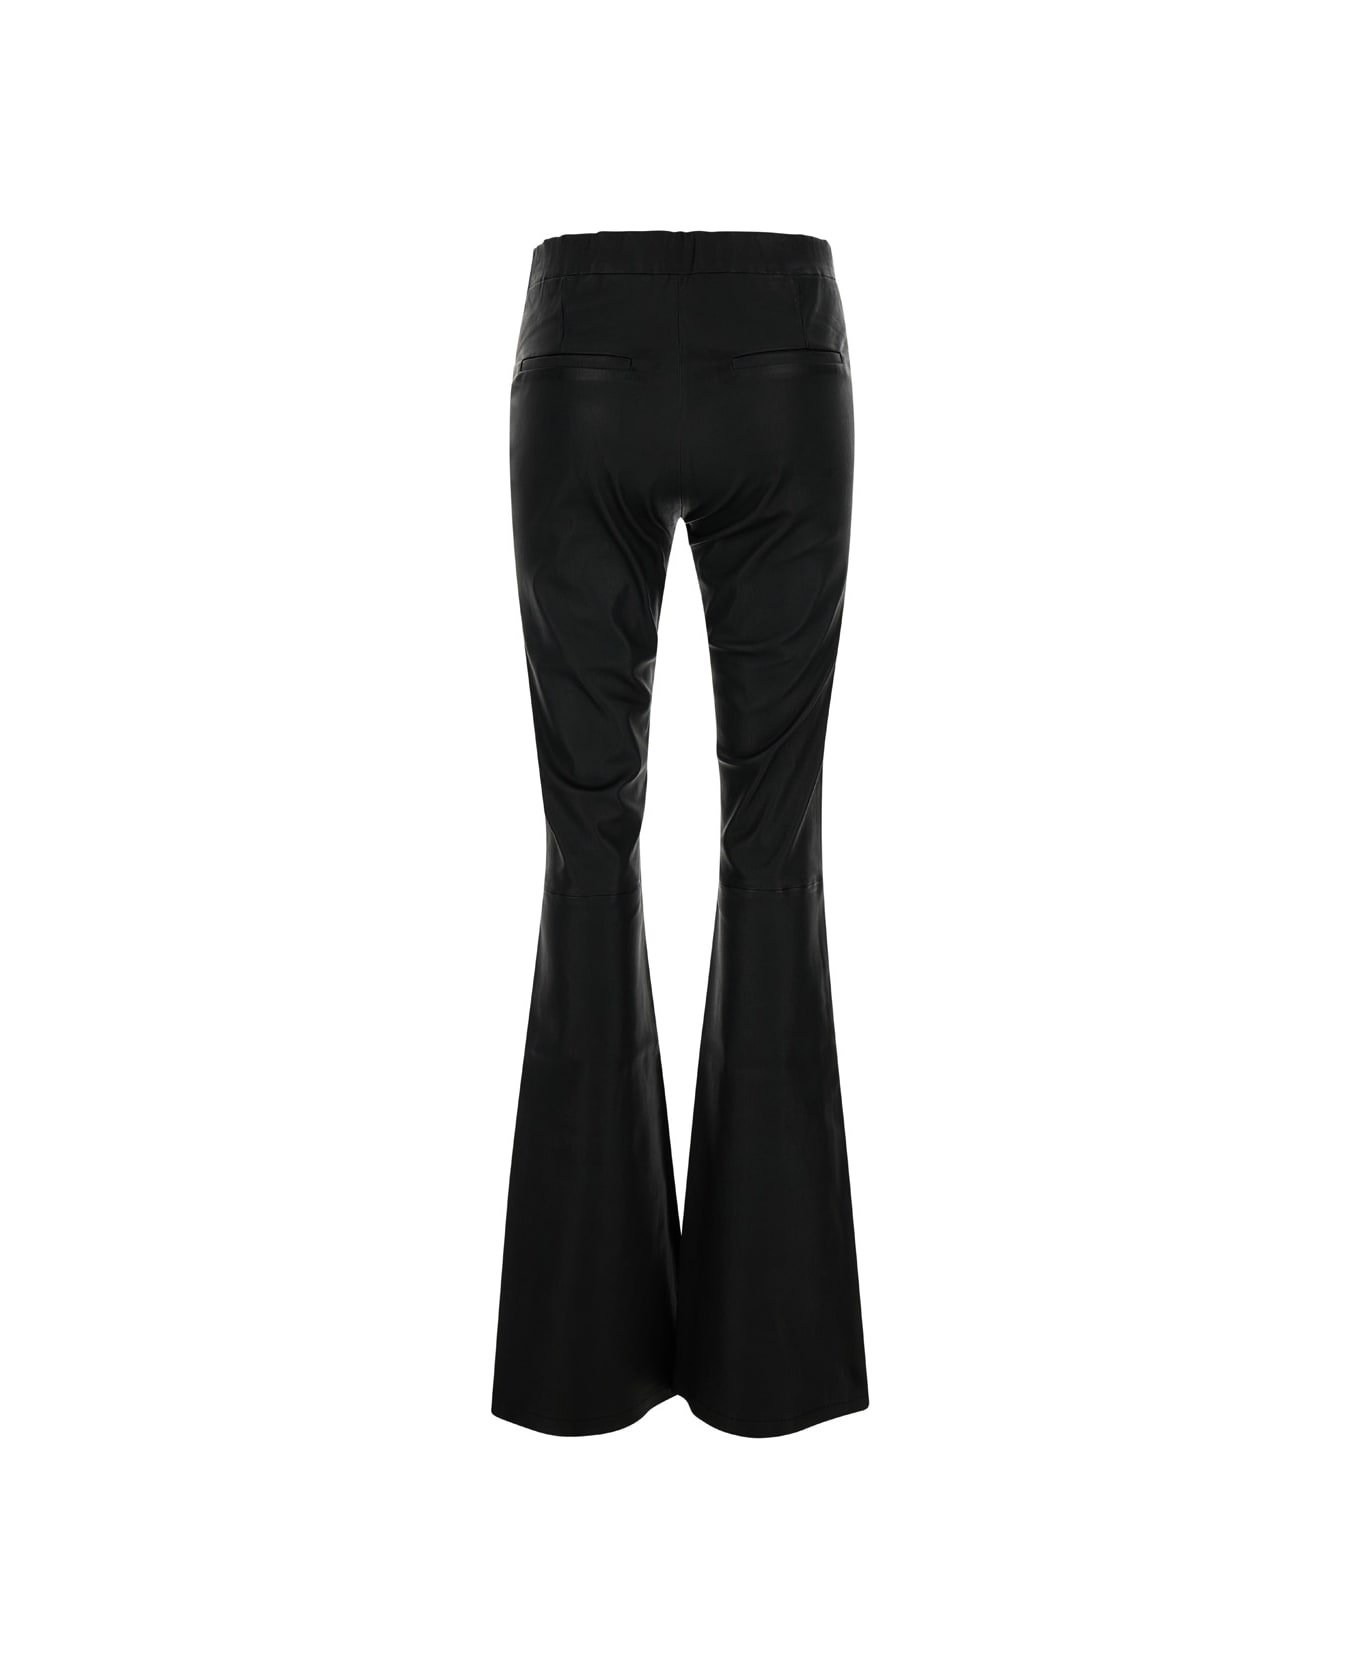 ARMA Black Flared Trousers In Leather Woman - Black ボトムス